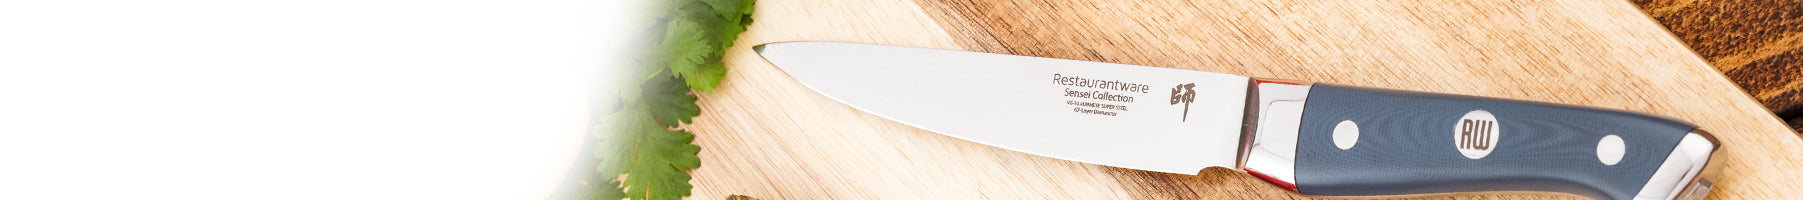 Banner_Smallwares_Kitchen-Knives-Cutlery_Utility-Knives_240